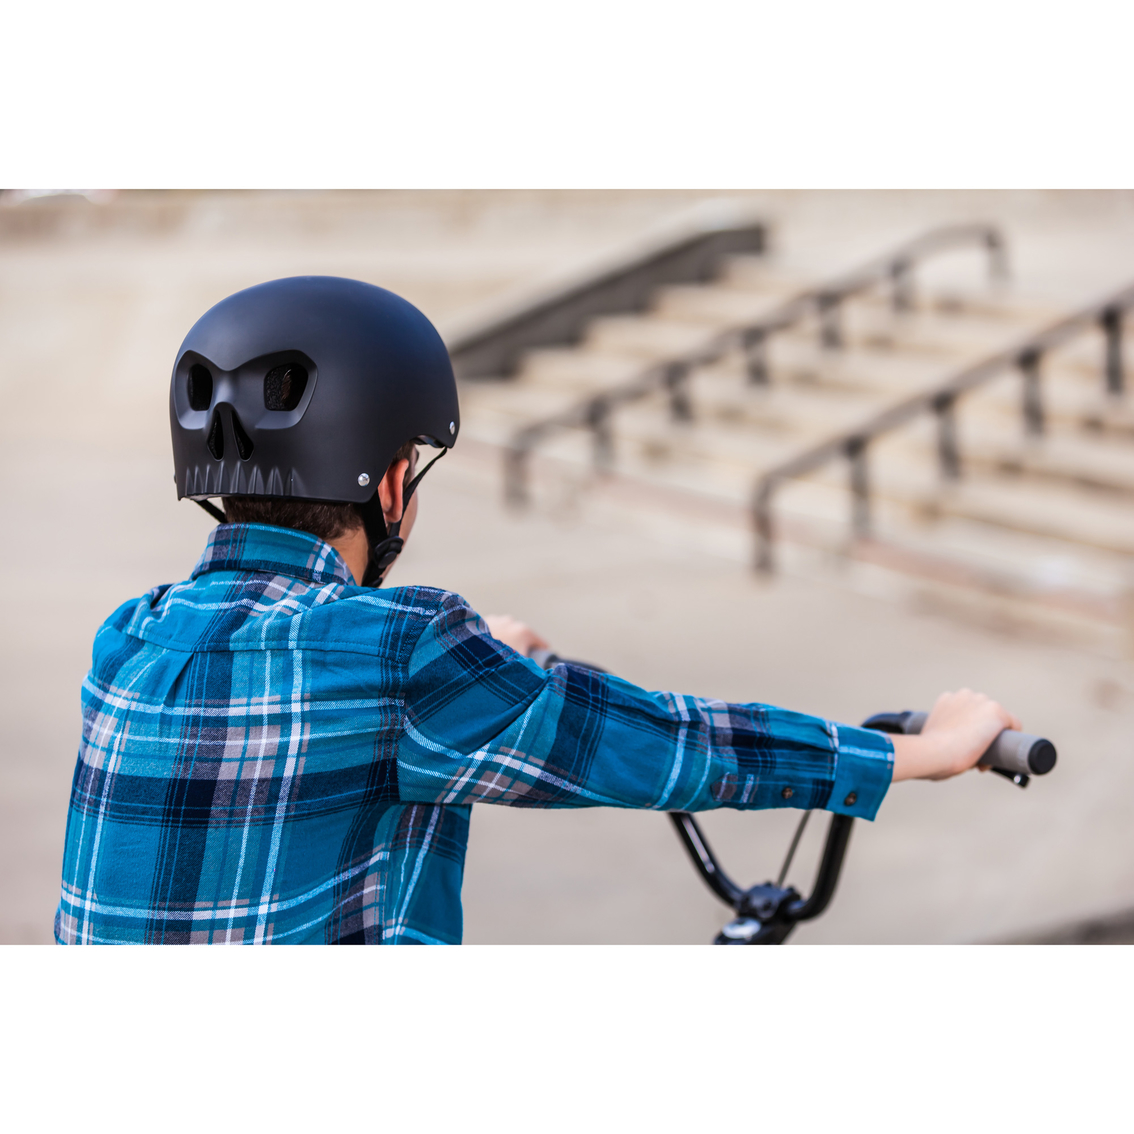 Mongoose Street Skull Youth Hardshell Helmet With Orange Vents | Bike  Accessories | Sports  Outdoors | Shop The Exchange